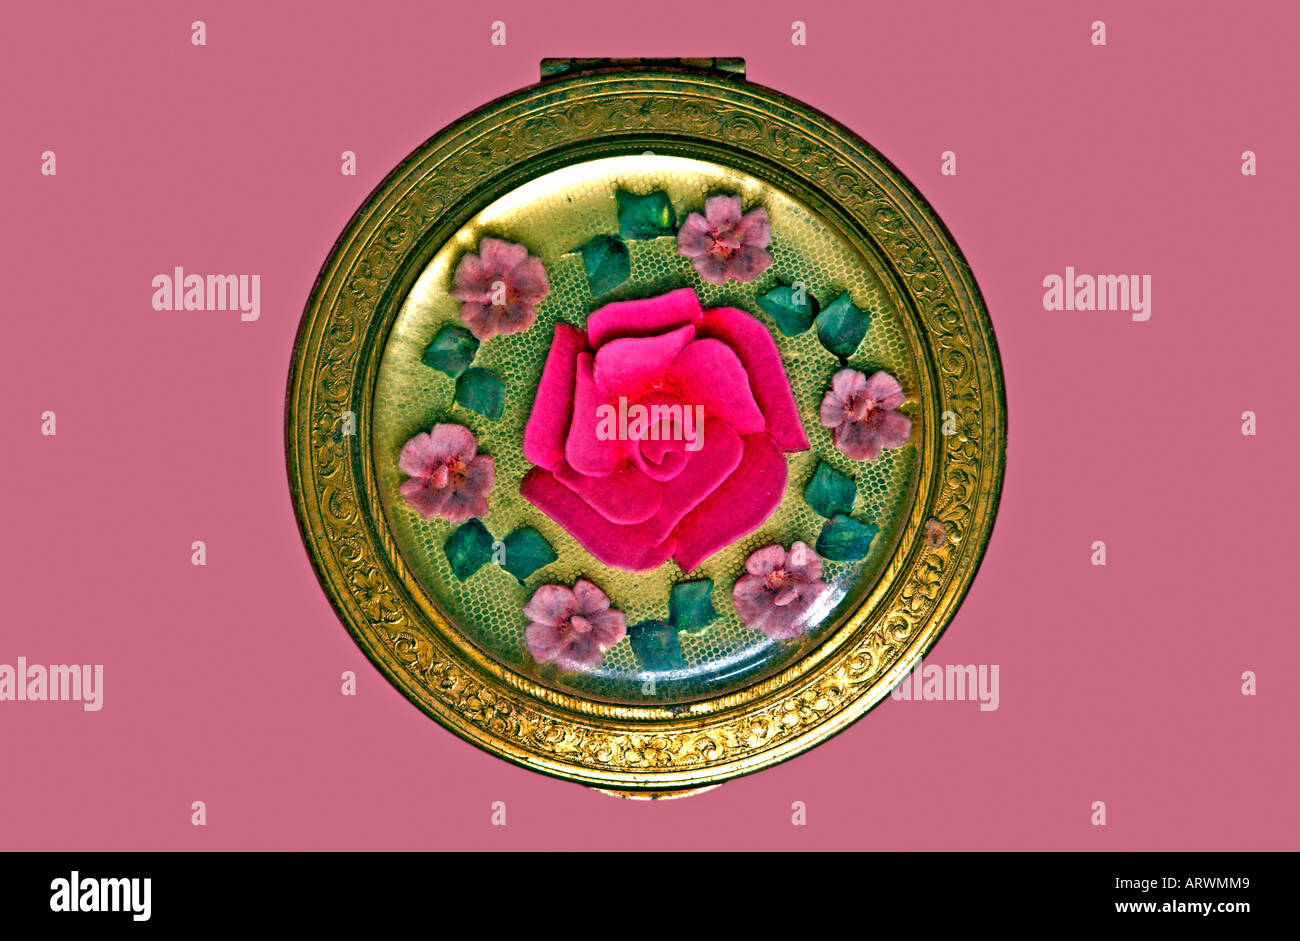 Vintage Rose Compact By Stratton Stock Photo